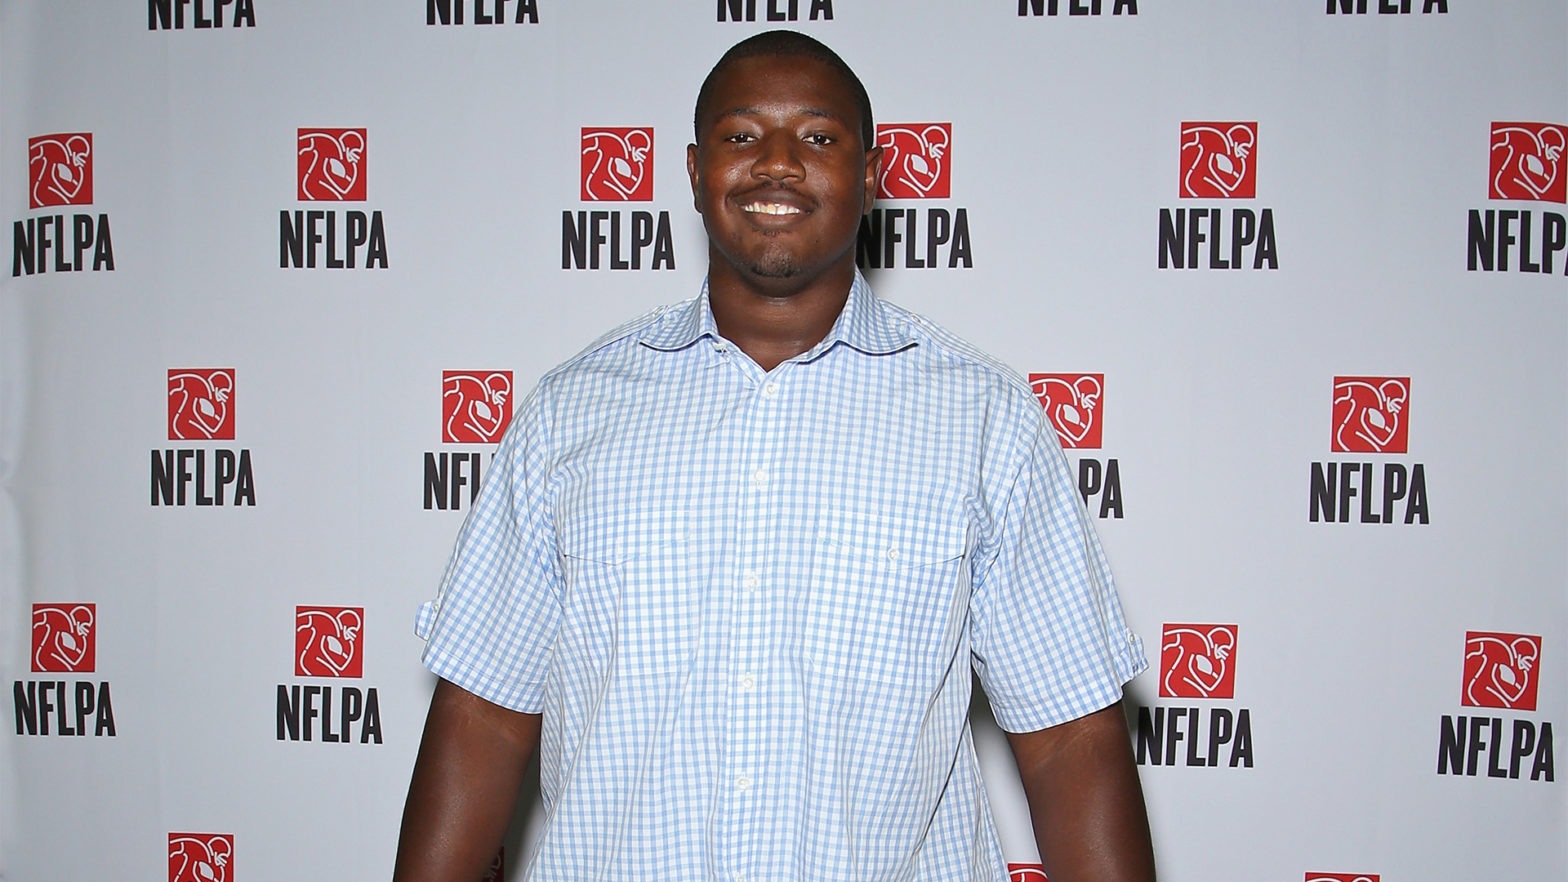 Kelvin Beachum Becomes The First Pro Athlete To Debut NFT Collection During A Live Sporting Event